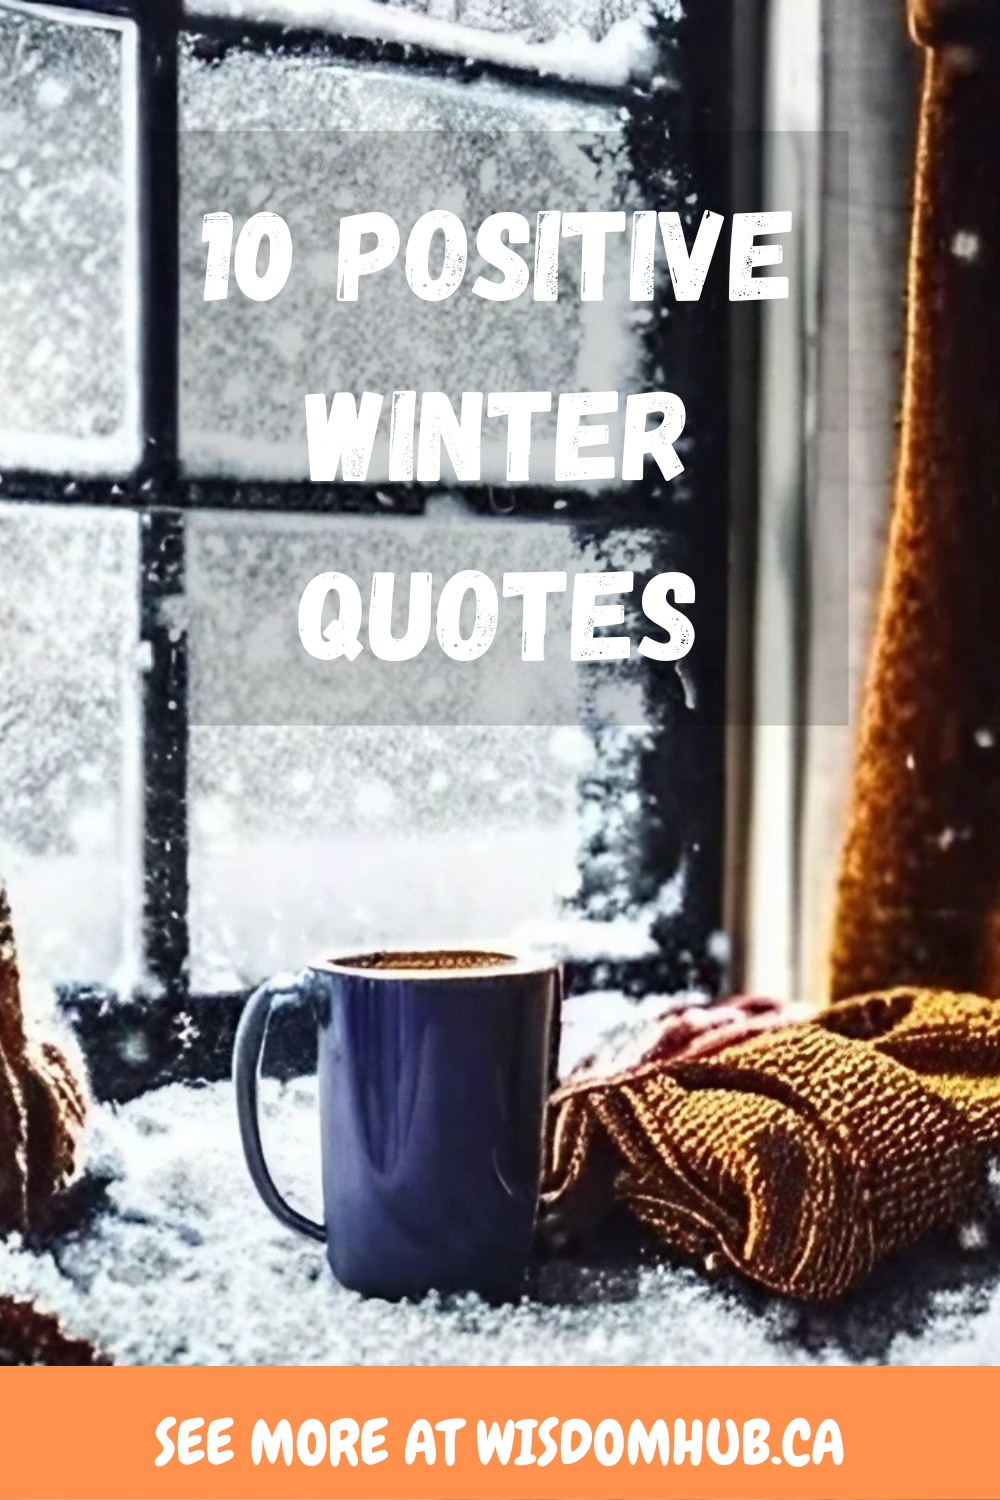 10 Positive Winter Quotes